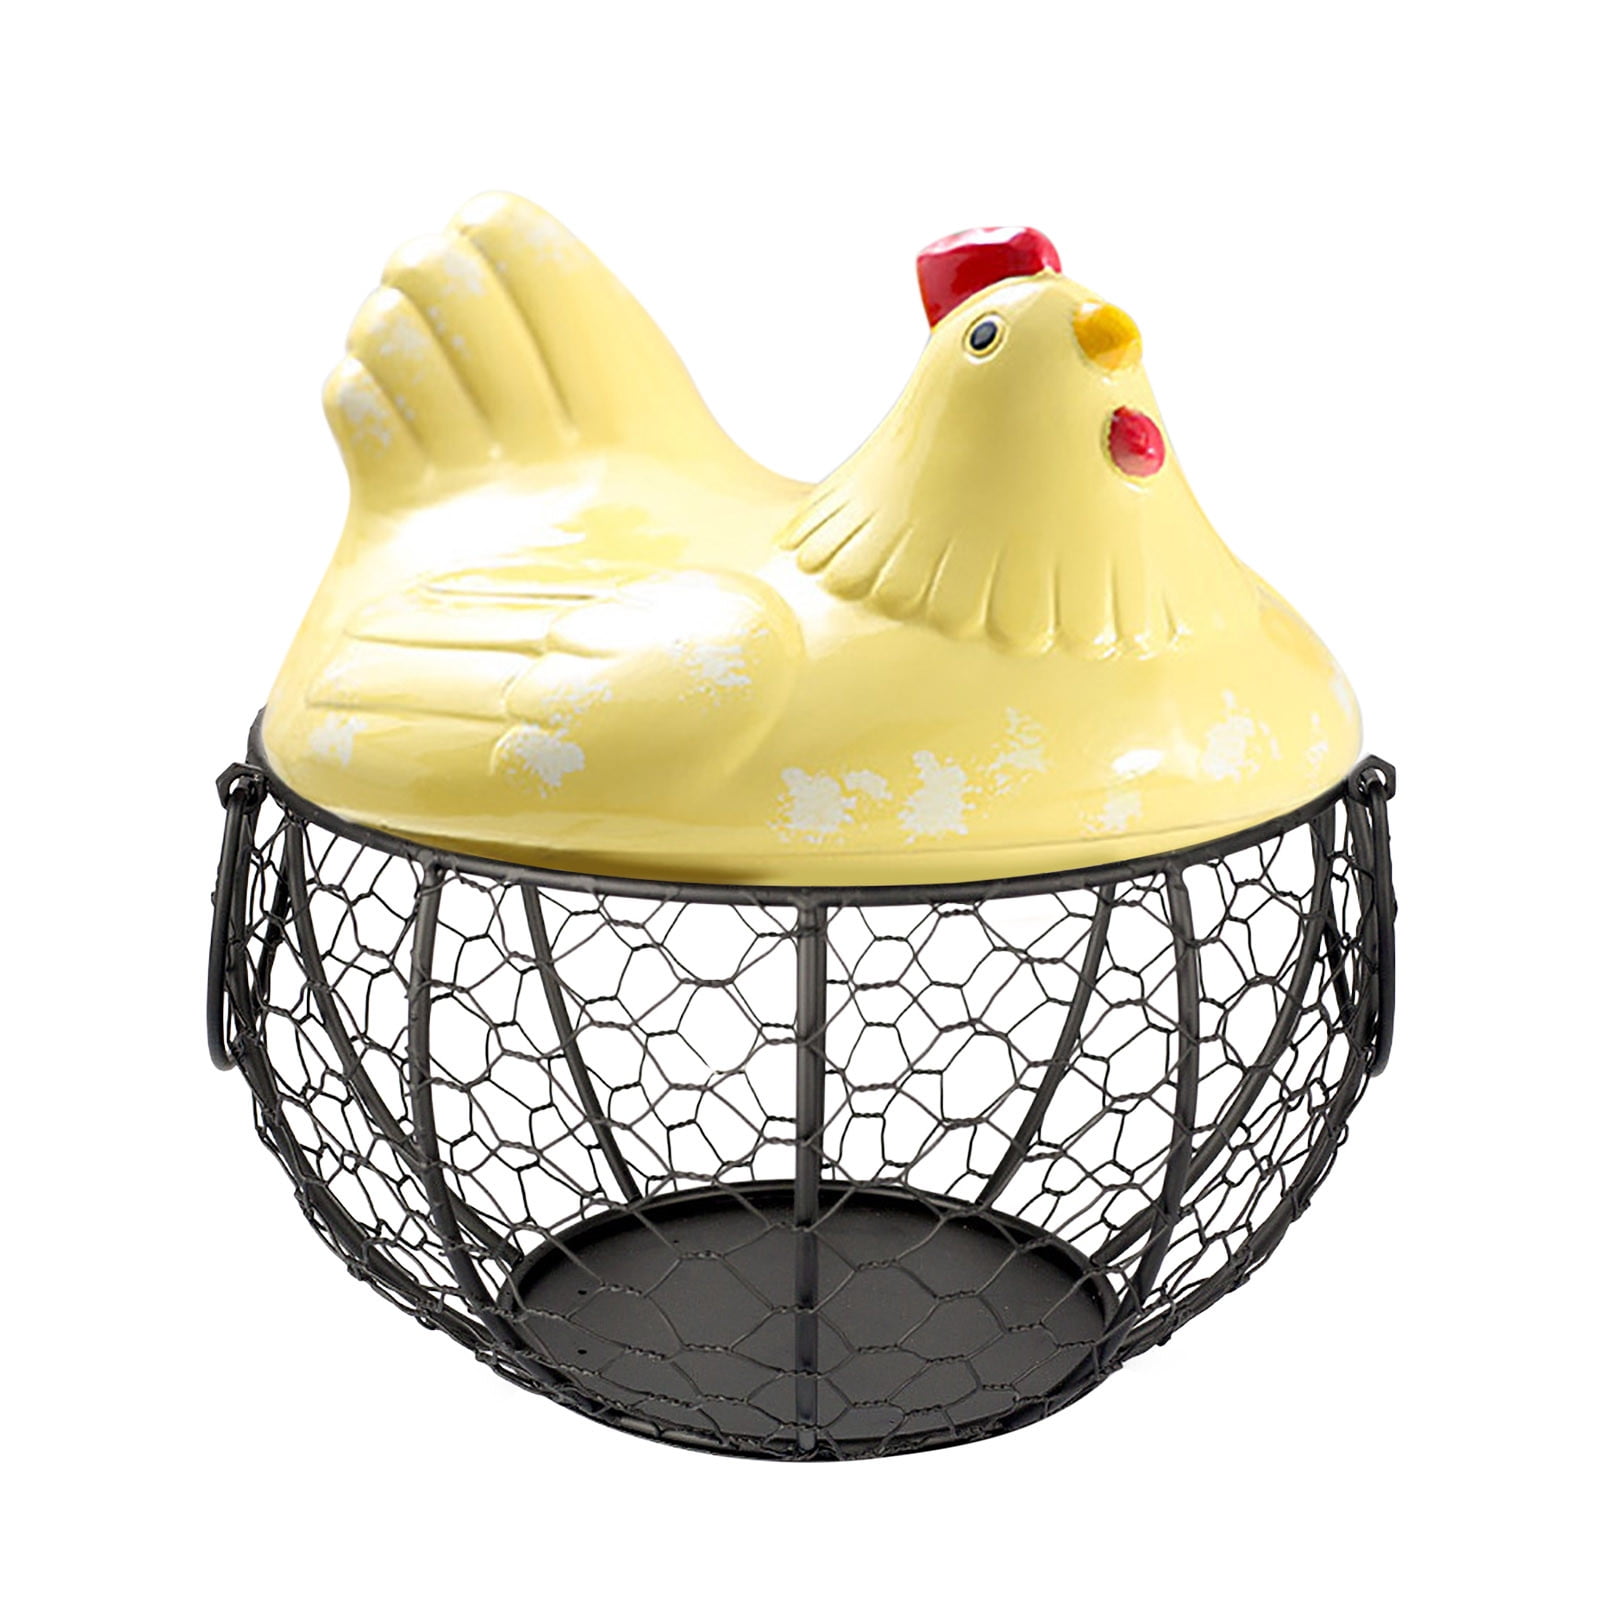 Ceramic Egg Holder And Fruit Basket 19CMX22CM Ceramic Food Storage  Containers For Hen Oraments And Collection T2006271E From Pamela56, $23.73